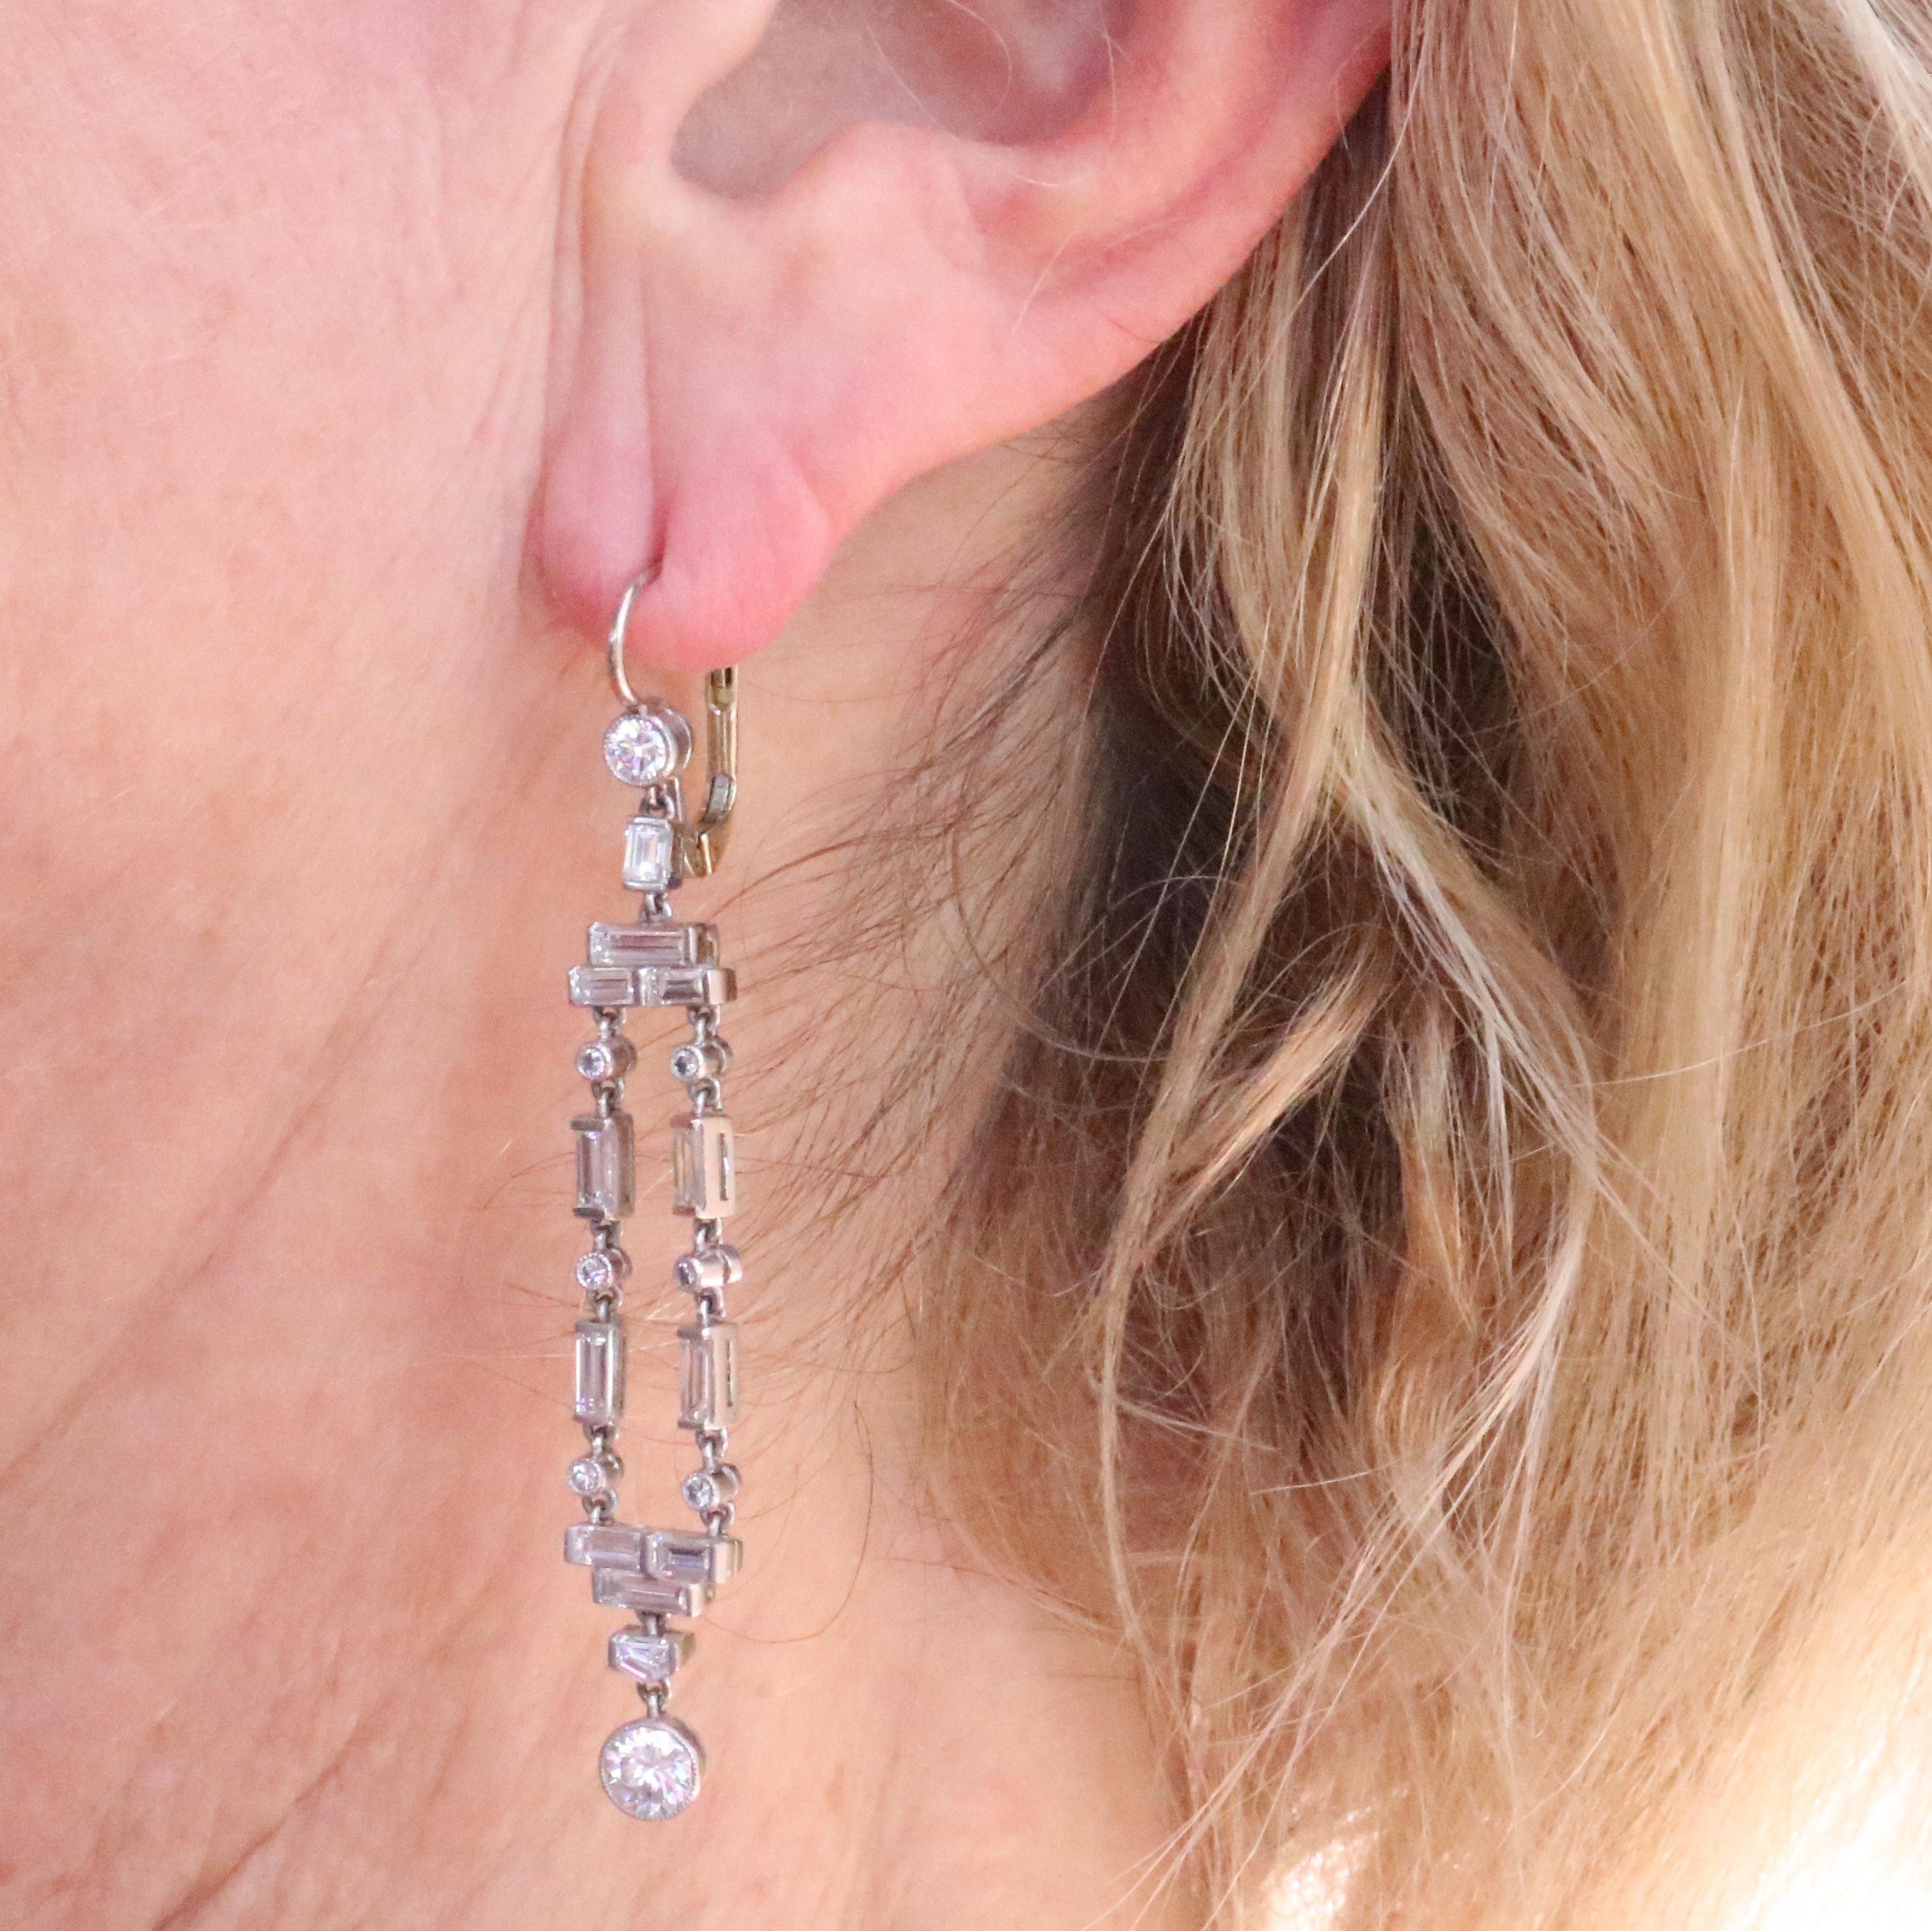 Art deco inspired earrings featuring approximately 3 carats of diamonds. 2 old European cut diamonds drops weigh approximately 0.70 carats total, graded G-H color, VS clarity. The top features 2 old European cut diamonds that weigh approximately